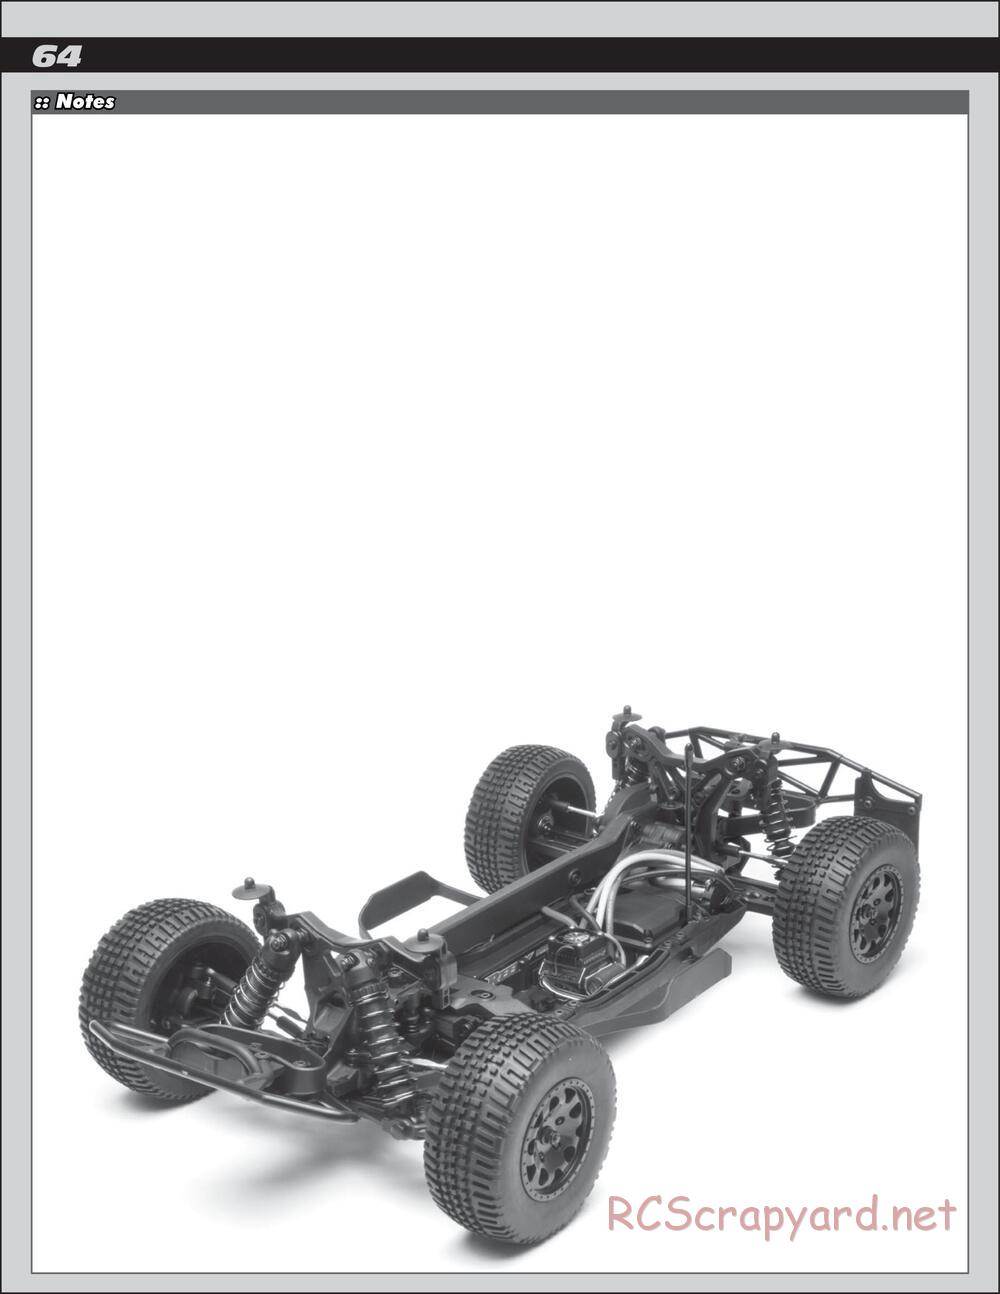 Team Associated - SC10 4x4 Factory Team - Manual - Page 64